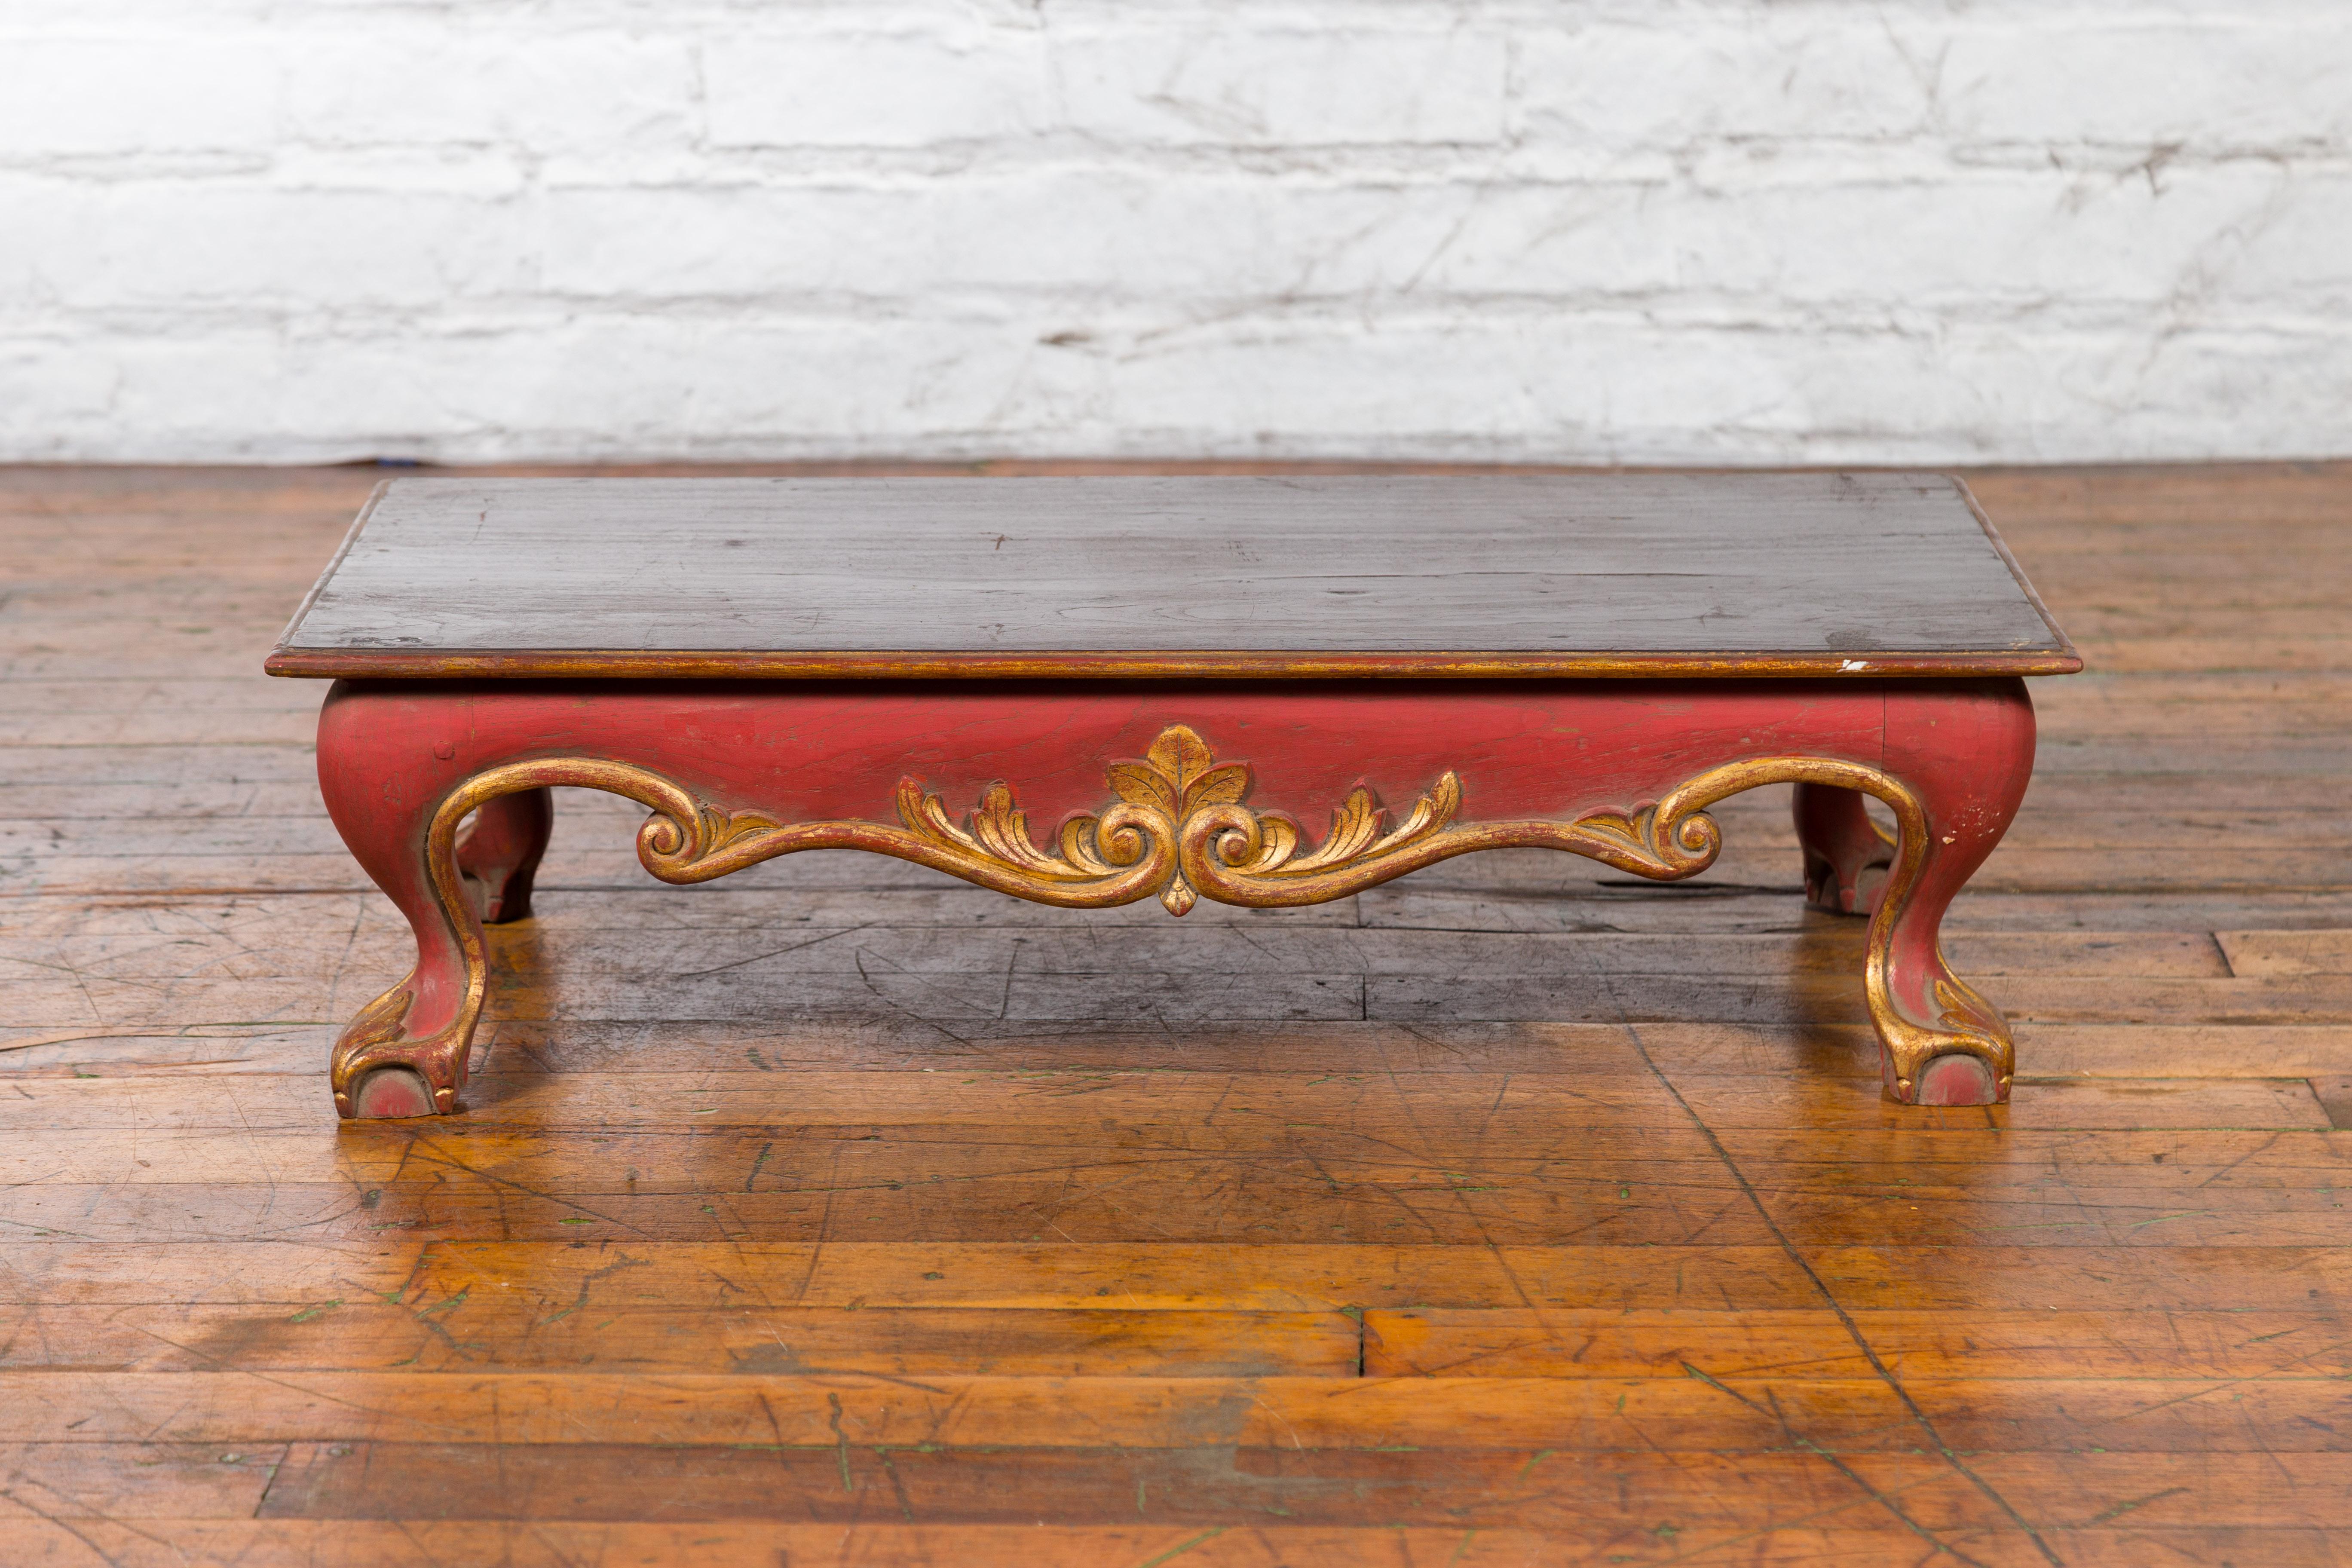 20th Century Indonesian Vintage Rococo Style Red and Gold Low Table with Ball-and-claw Feet For Sale